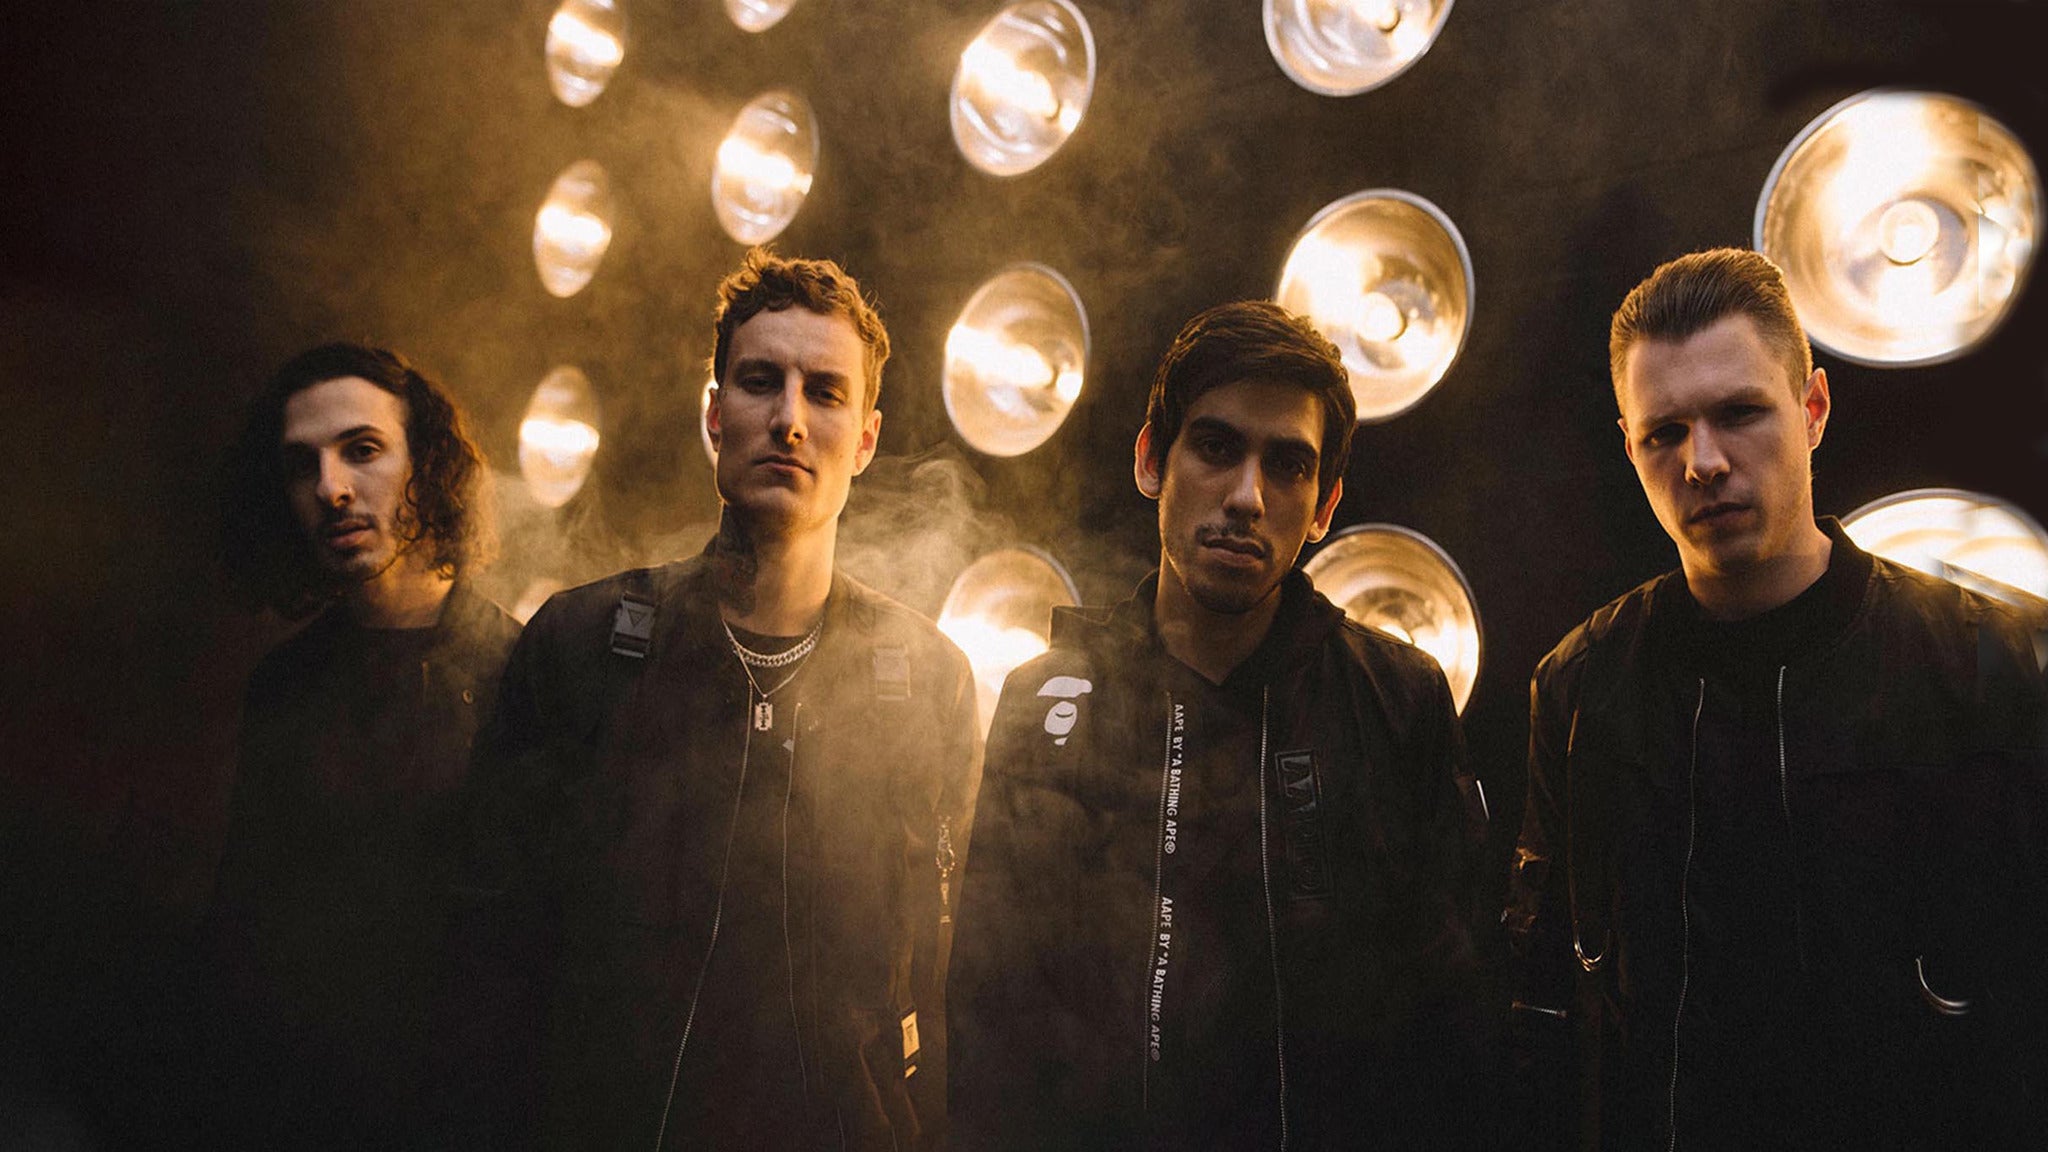 Crown the Empire: The Fallout 10 Year Anniversary Tour - Boise, ID 83702